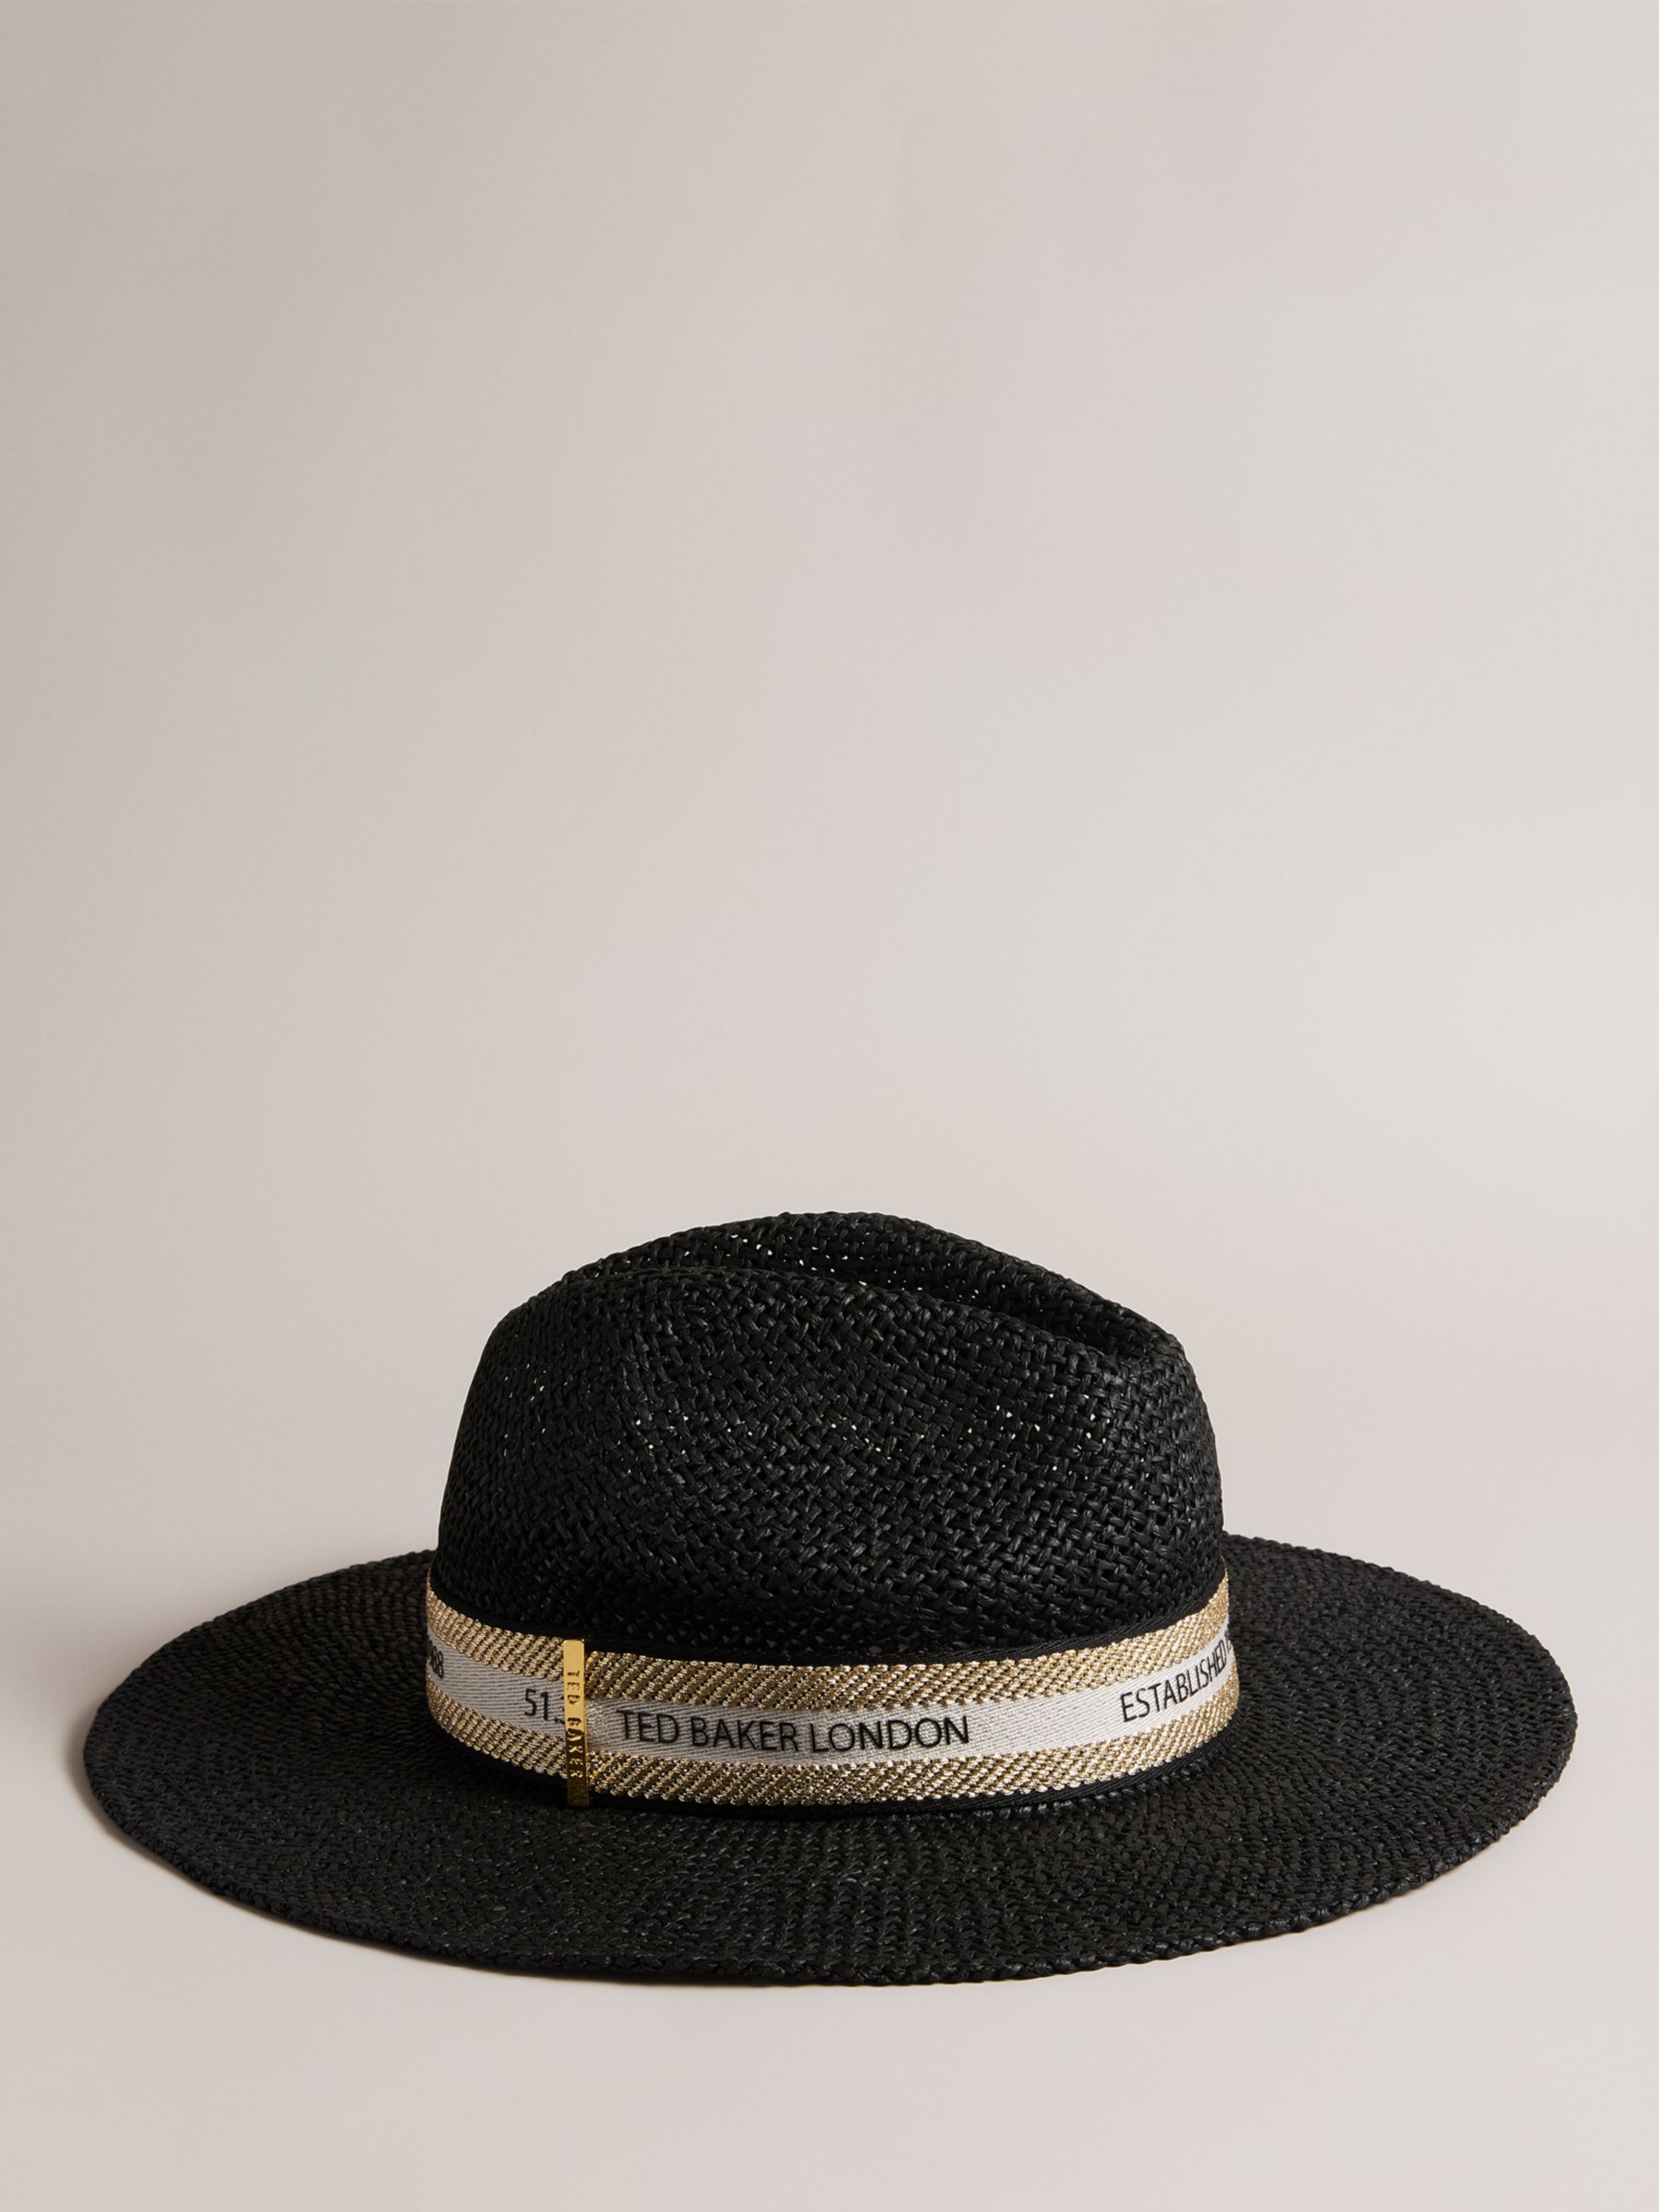 Ted Baker Clairie Straw Fedora Hat, Black, One Size